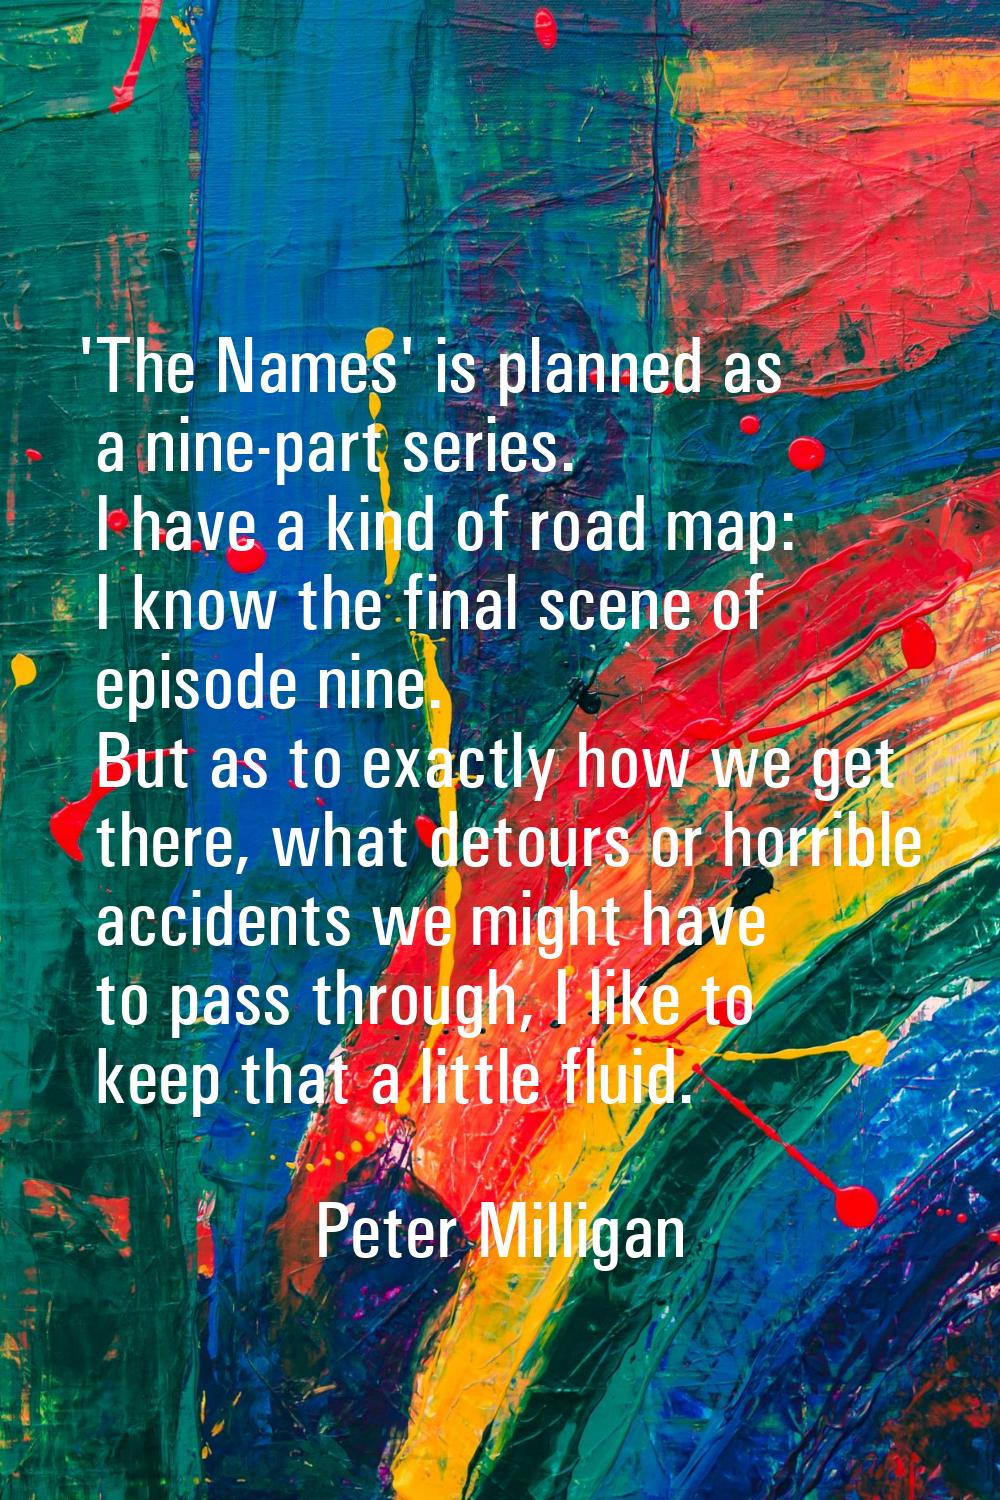 'The Names' is planned as a nine-part series. I have a kind of road map: I know the final scene of 